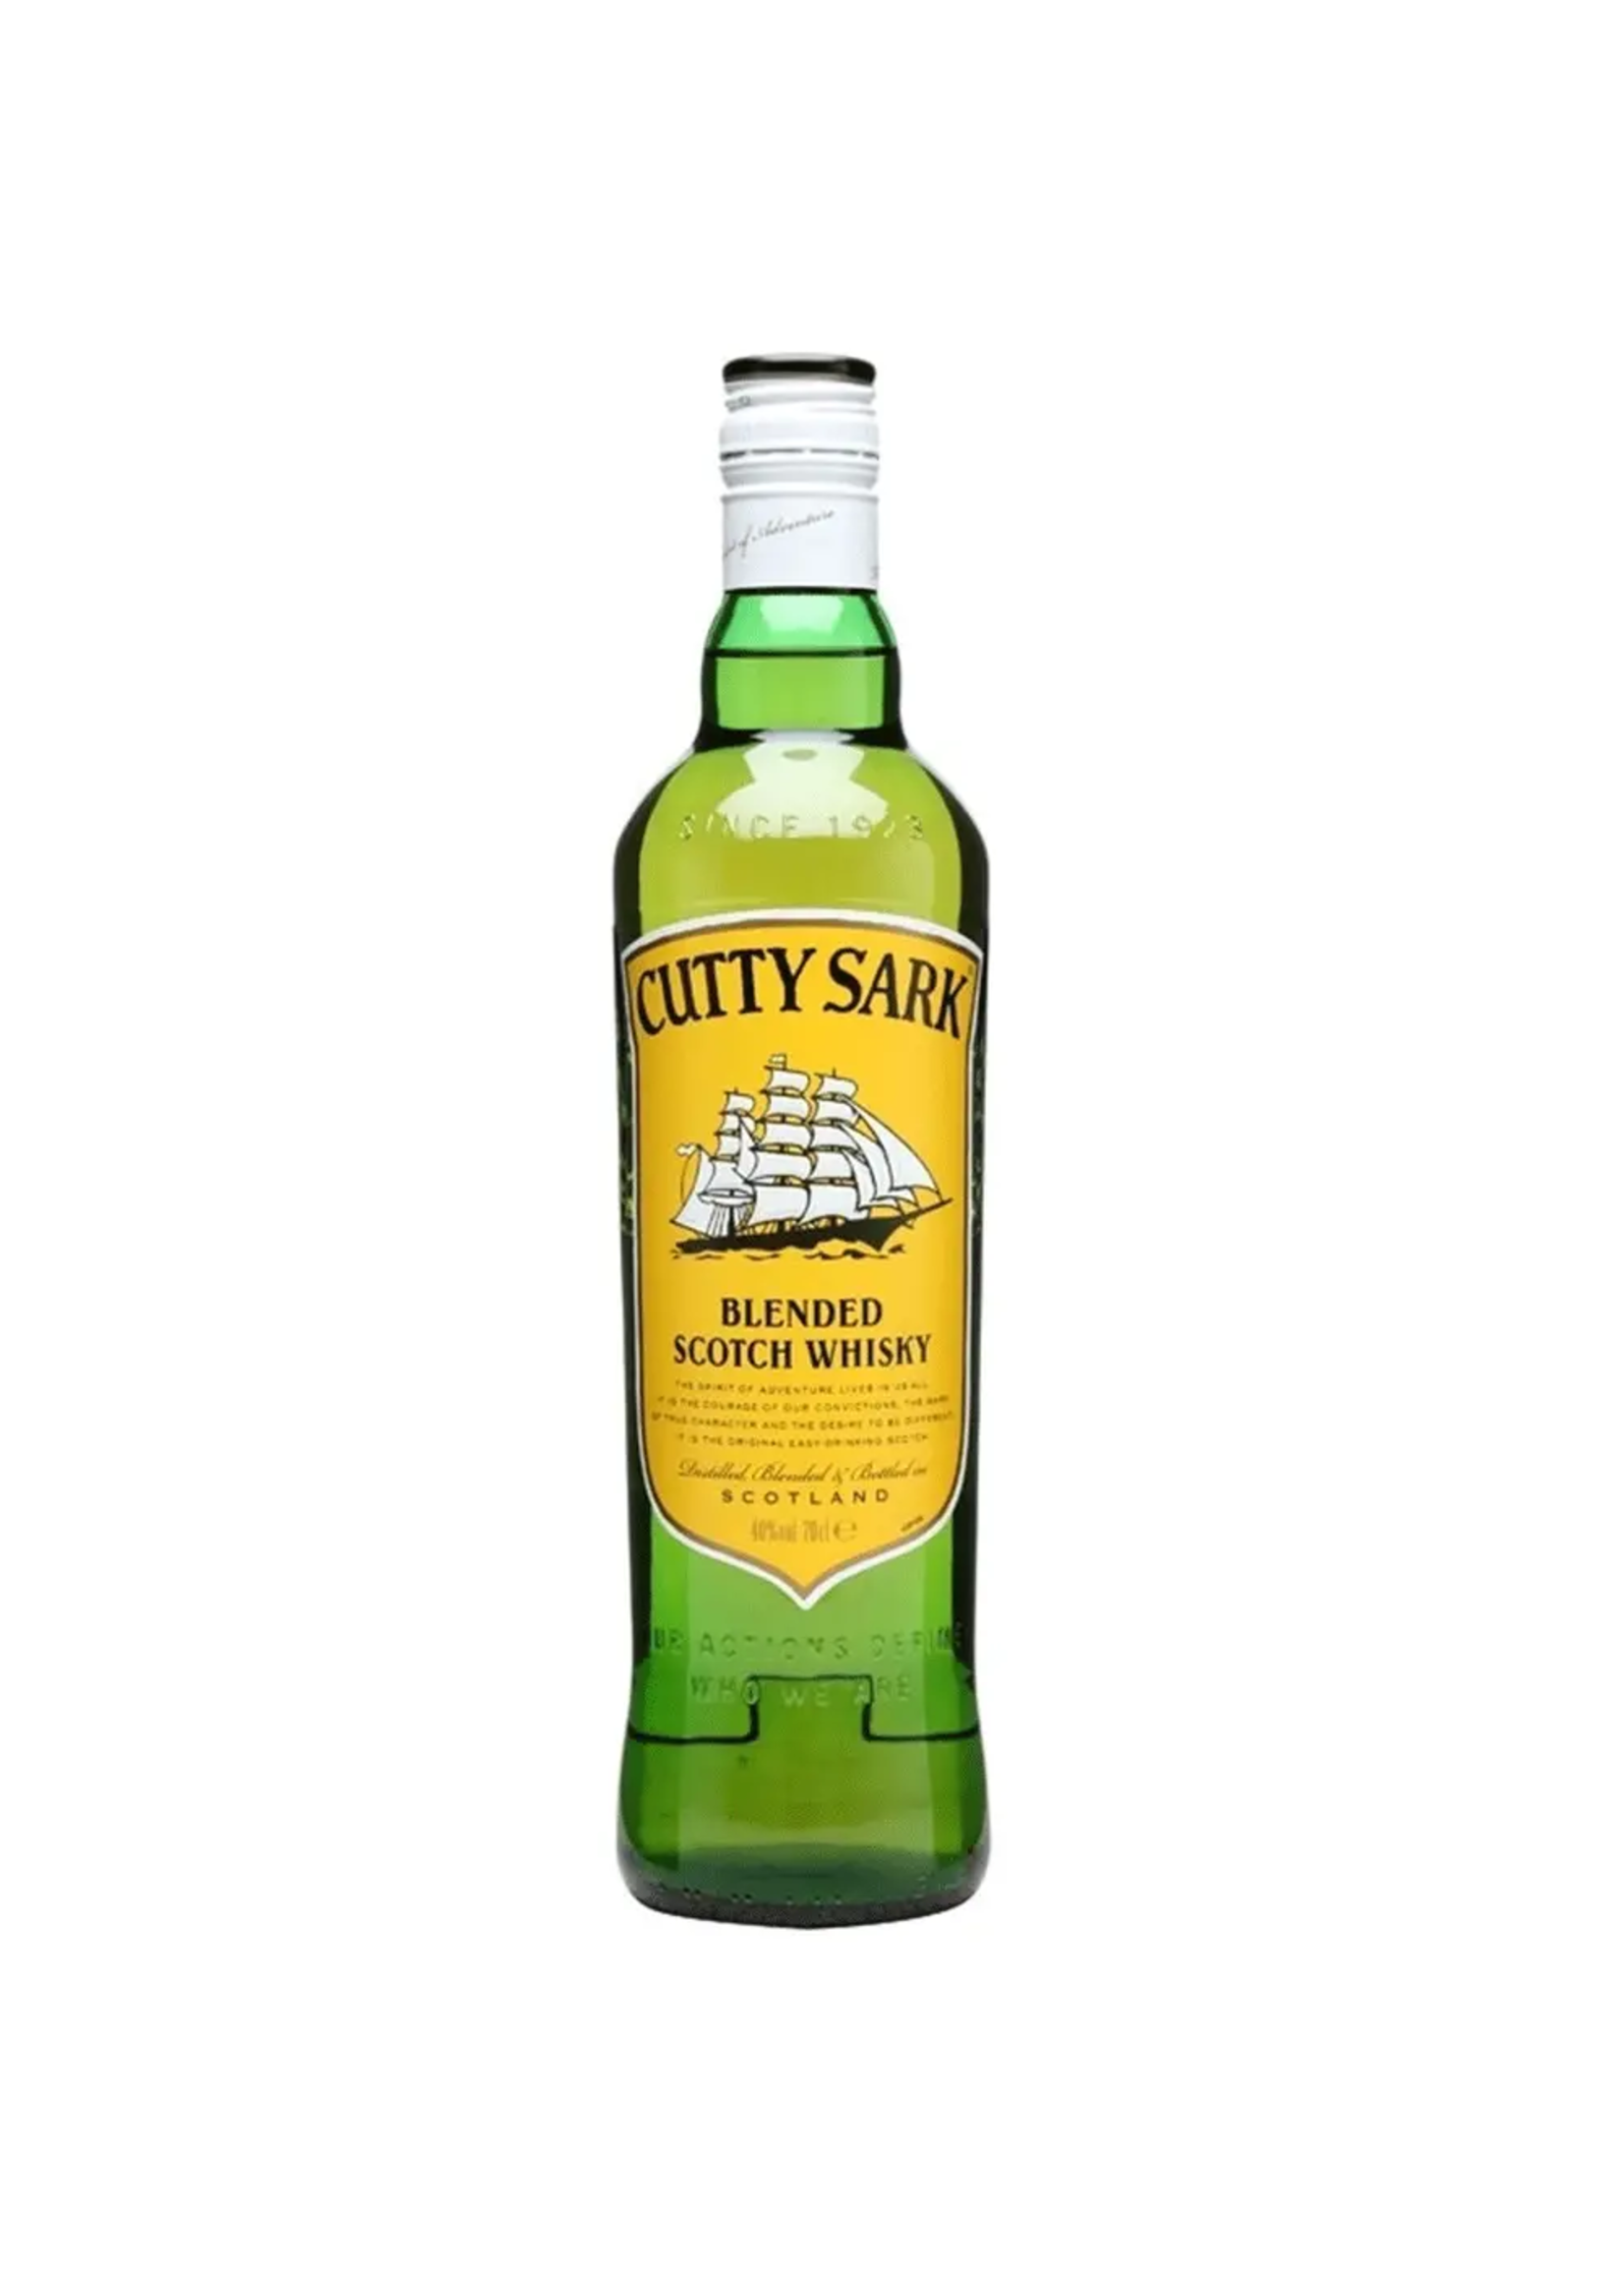 Cutty Sark Blended Scotch Whisky 80Proof 750ml